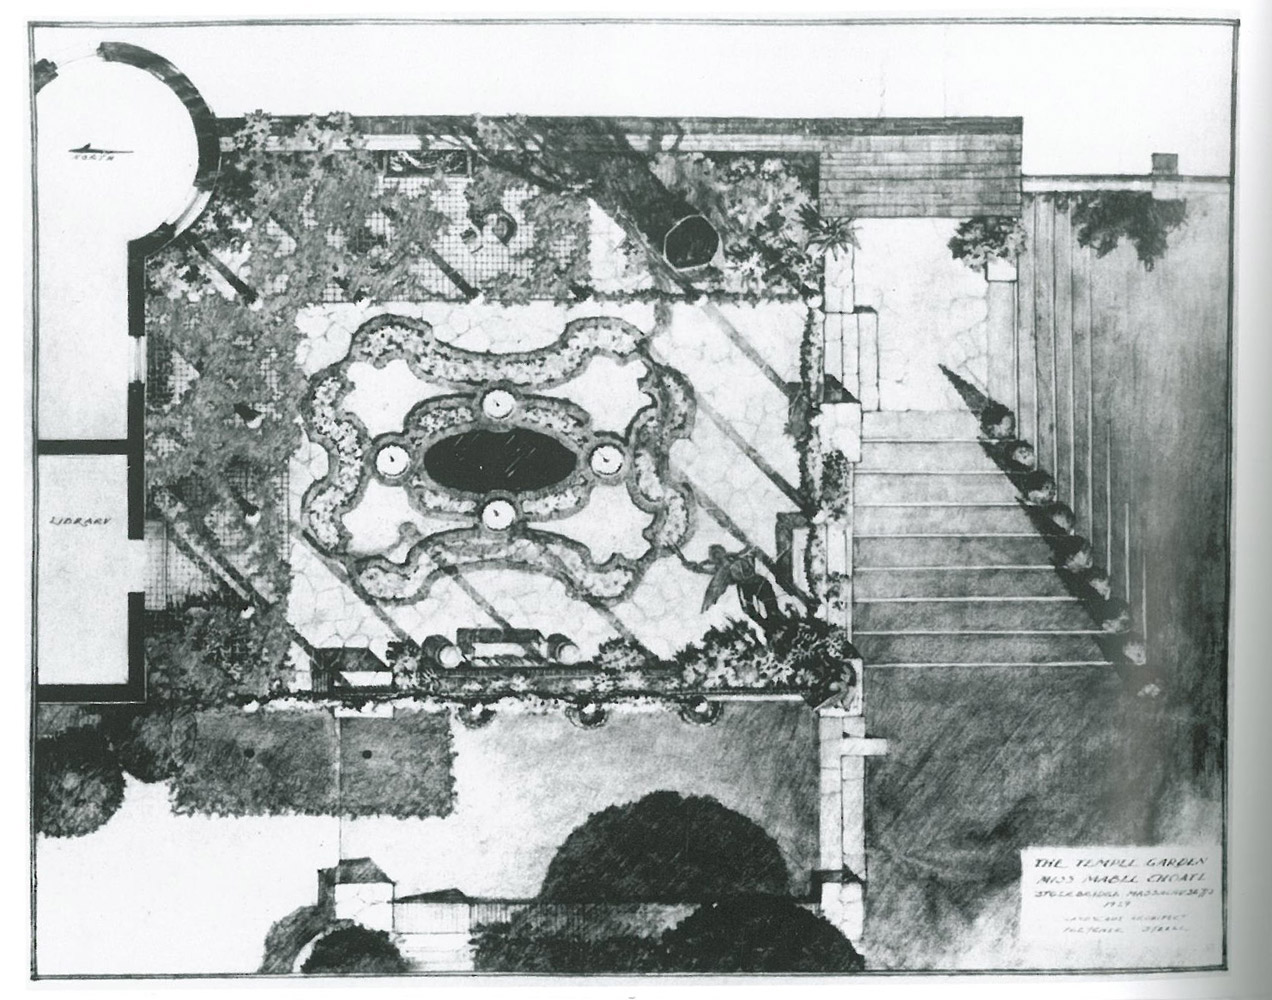 Birds-eye view of Afternoon Garden, drawn in 1930 by Henry Hoover, who worked for Steele. Steele was a gifted designer, but a mediocre draughtsman. Hoover’s renderings of Steele’s designs became an important sales tool; so expressive were his drawings that clients could see exactly how their finished gardens would appear. 